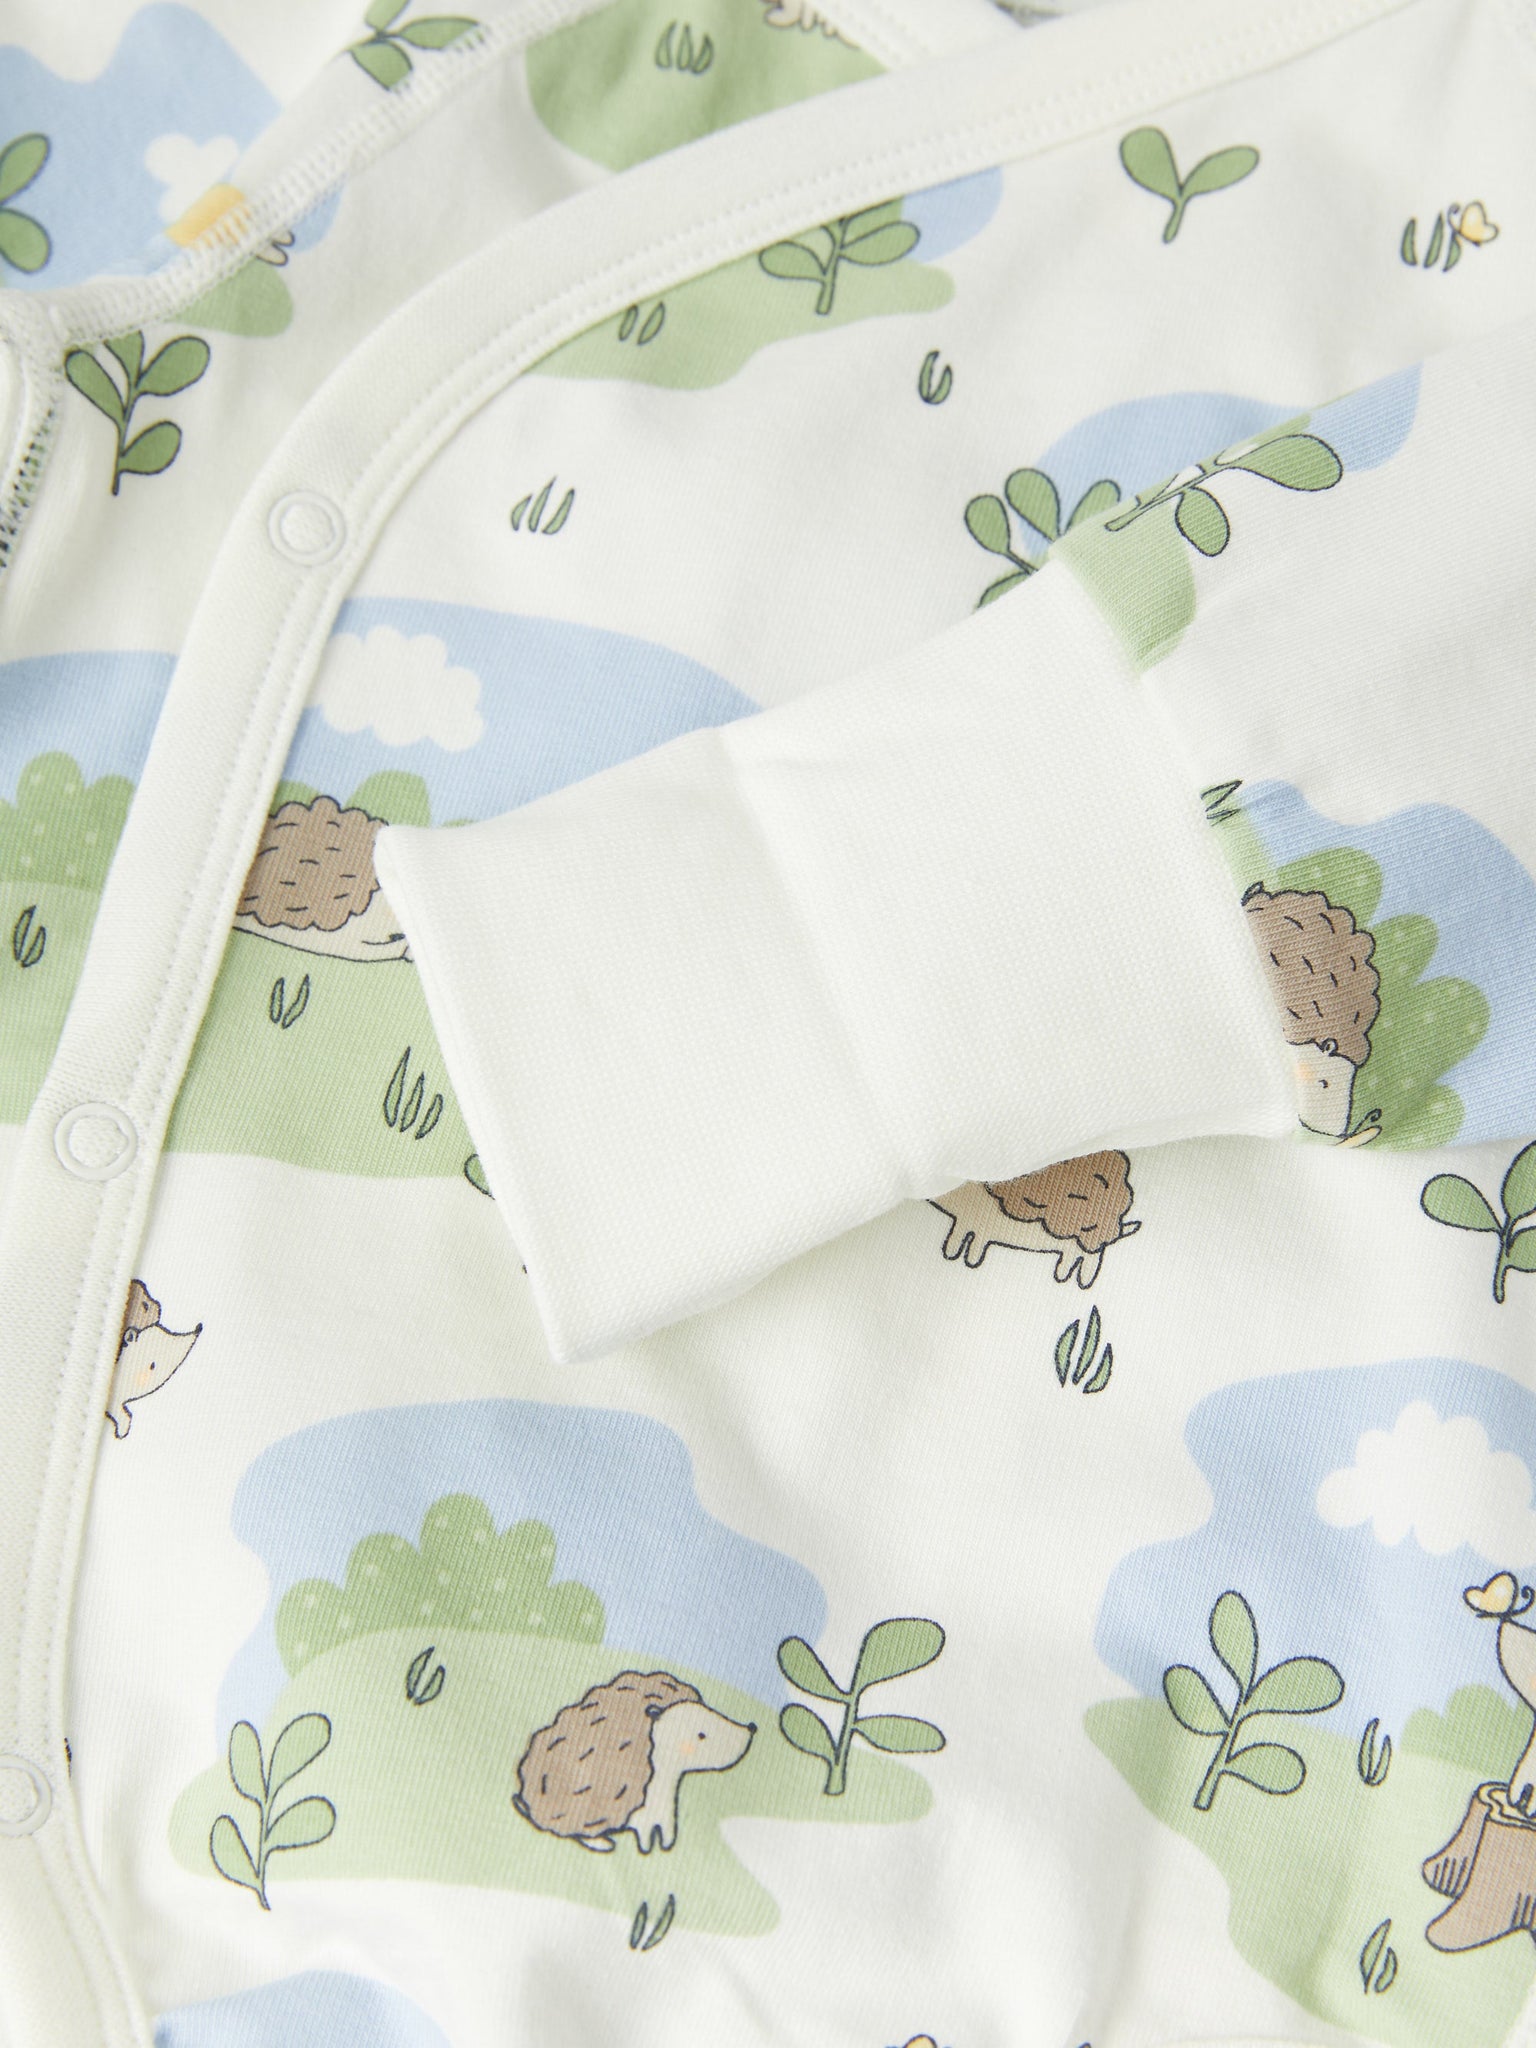 Squirrel Print Wraparound Babygrow from the Polarn O. Pyret baby collection. Clothes made using sustainably sourced materials.